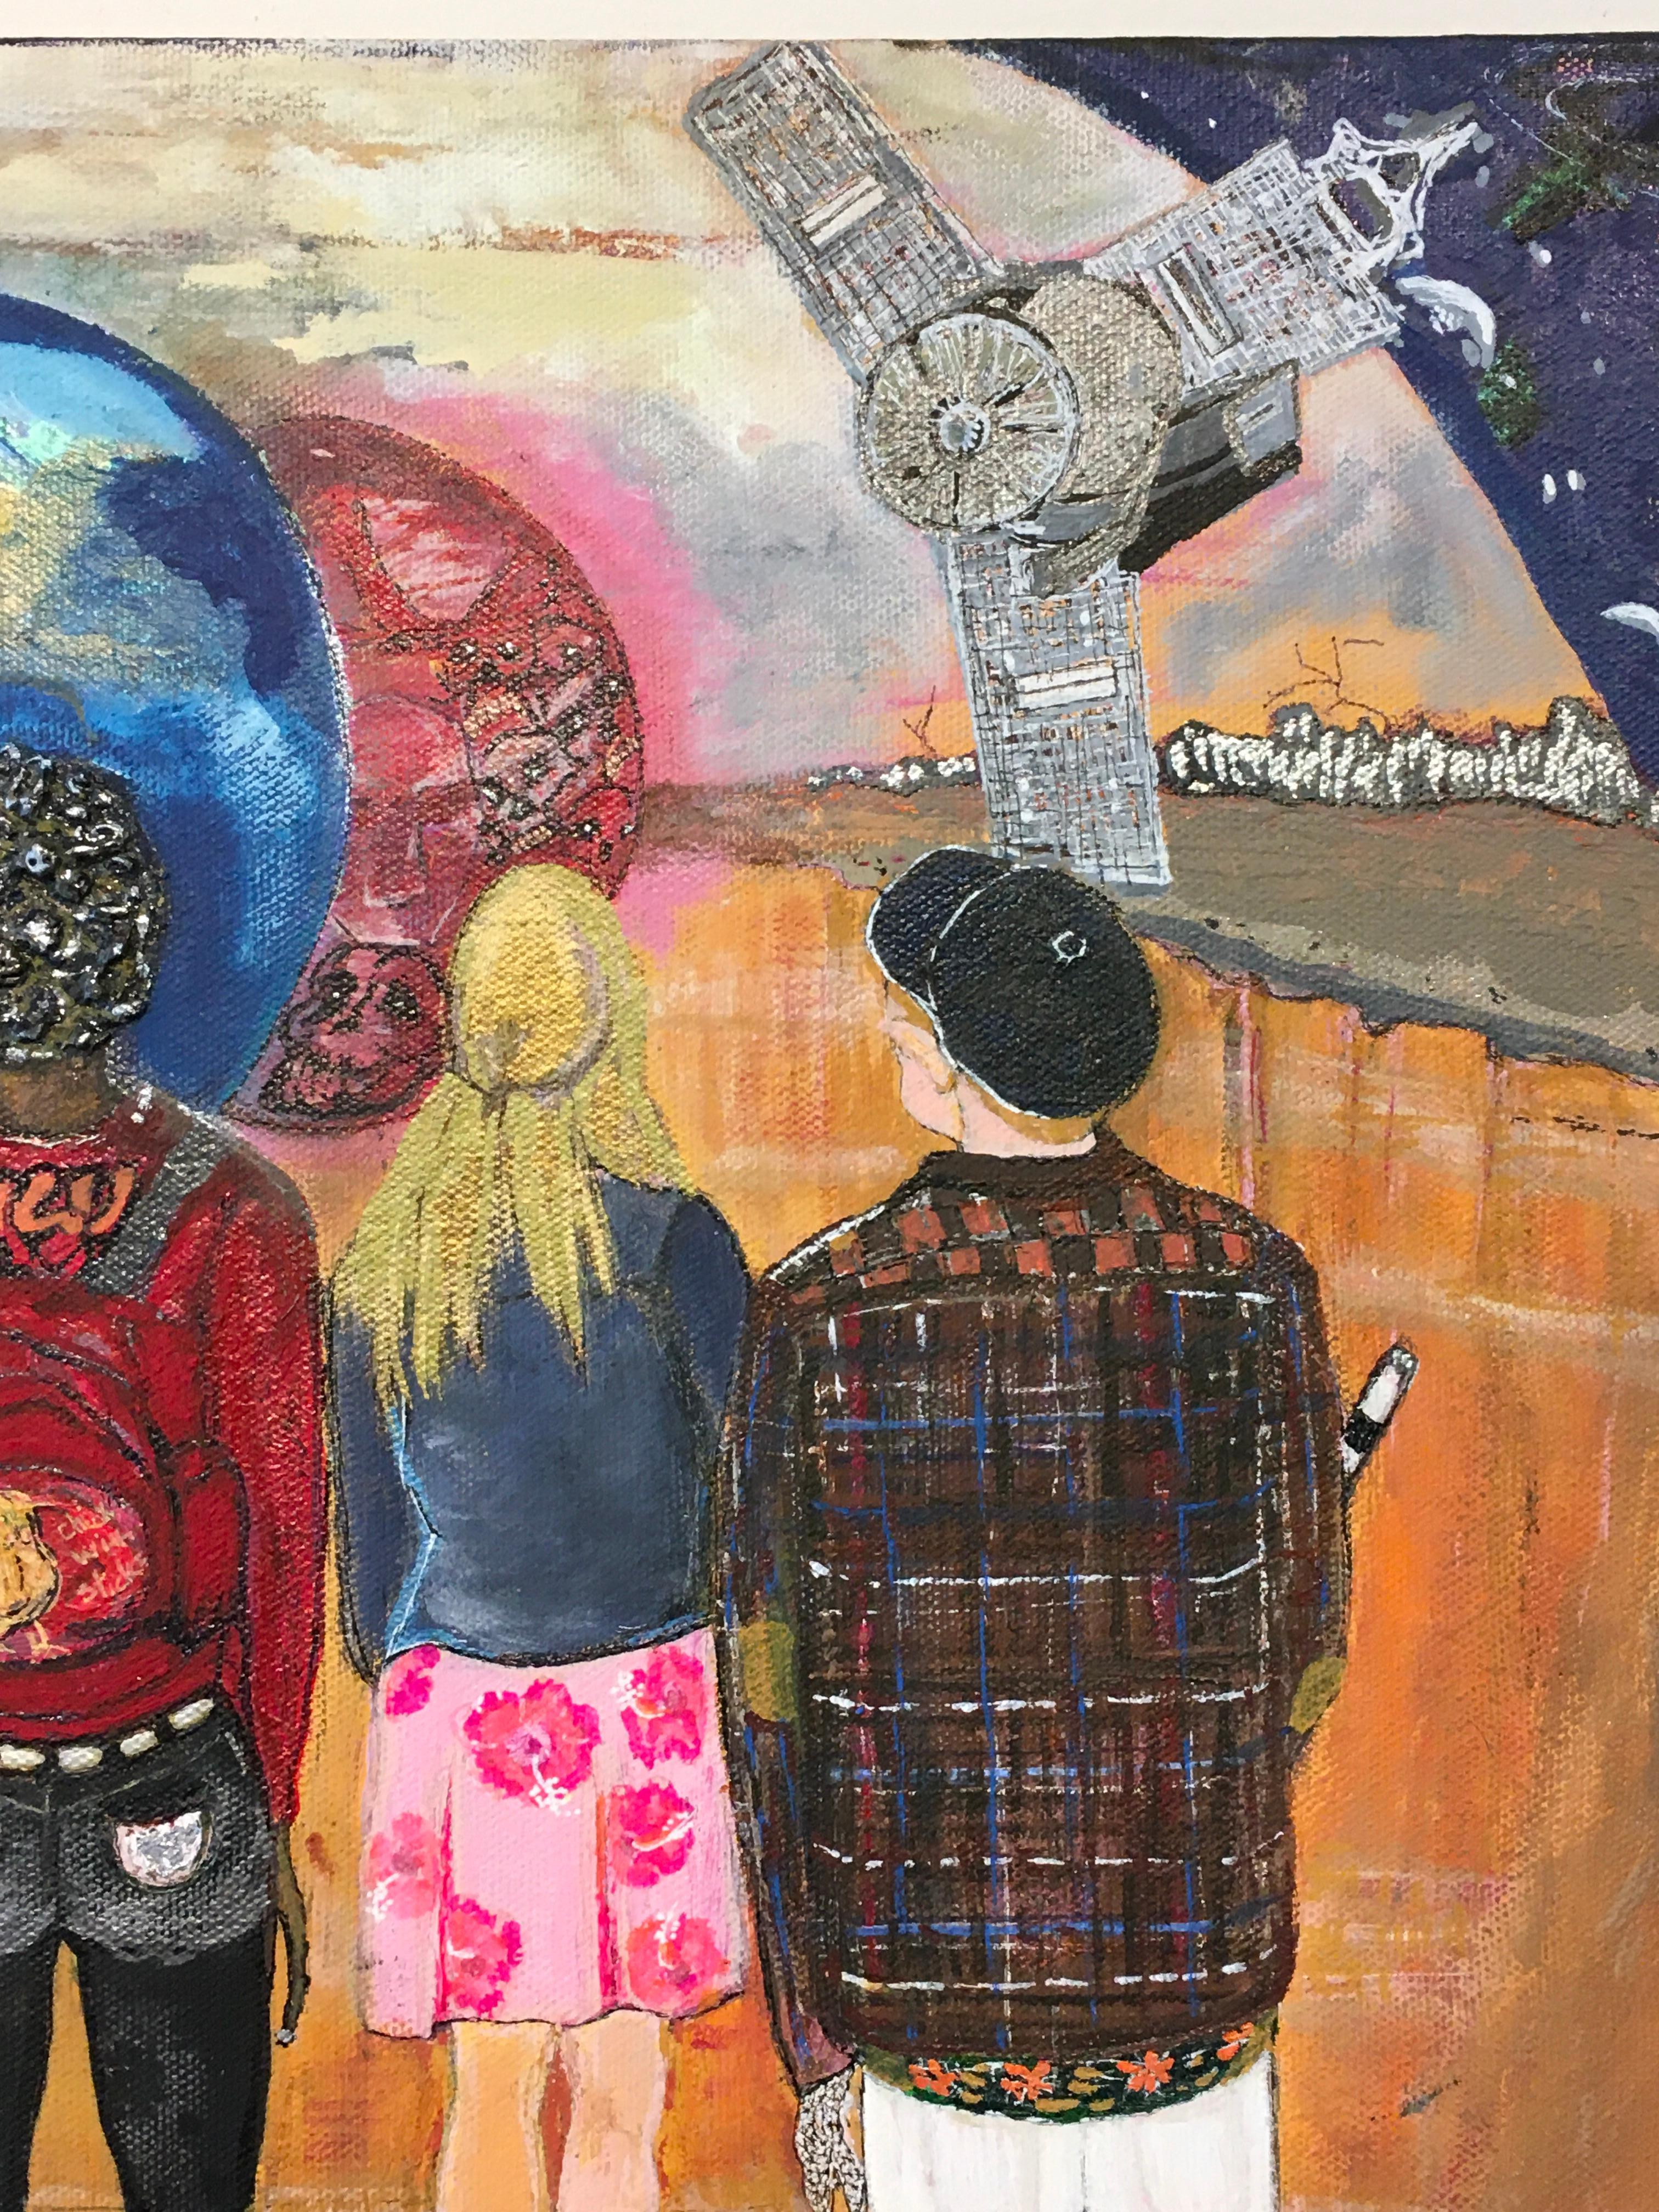 'The Welcoming Waiting on Earthlings Arrival' by Marcia Ermey, Acrylic on Canvas - Brown Figurative Painting by Marcia Ermey 